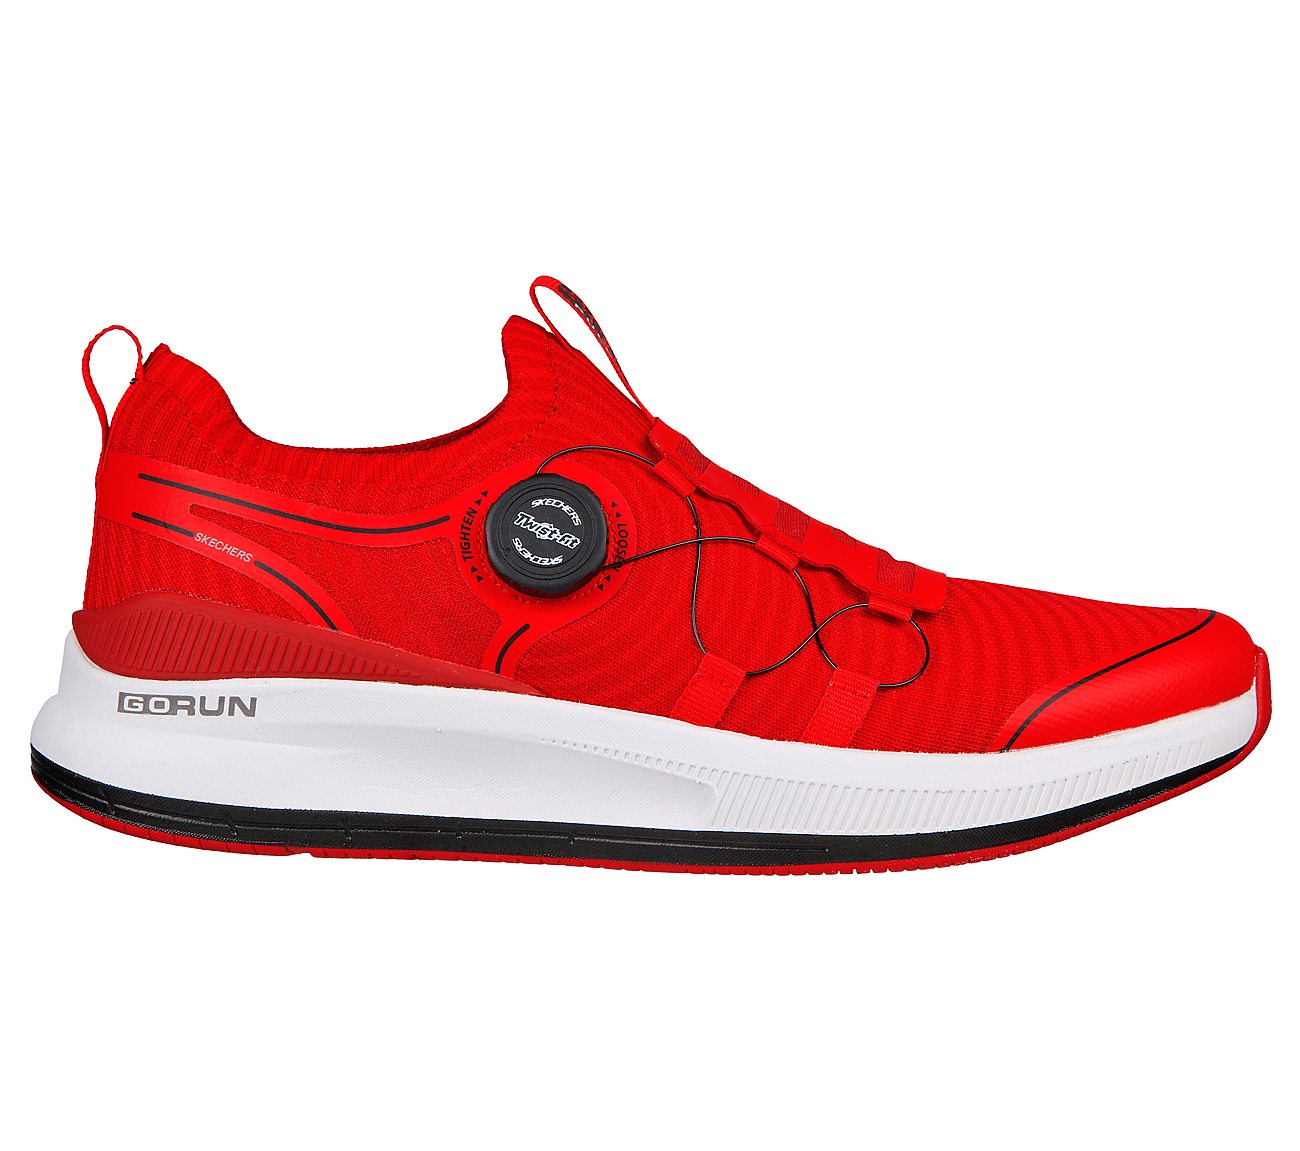 GO RUN PULSE, RED/BLACK Footwear Lateral View